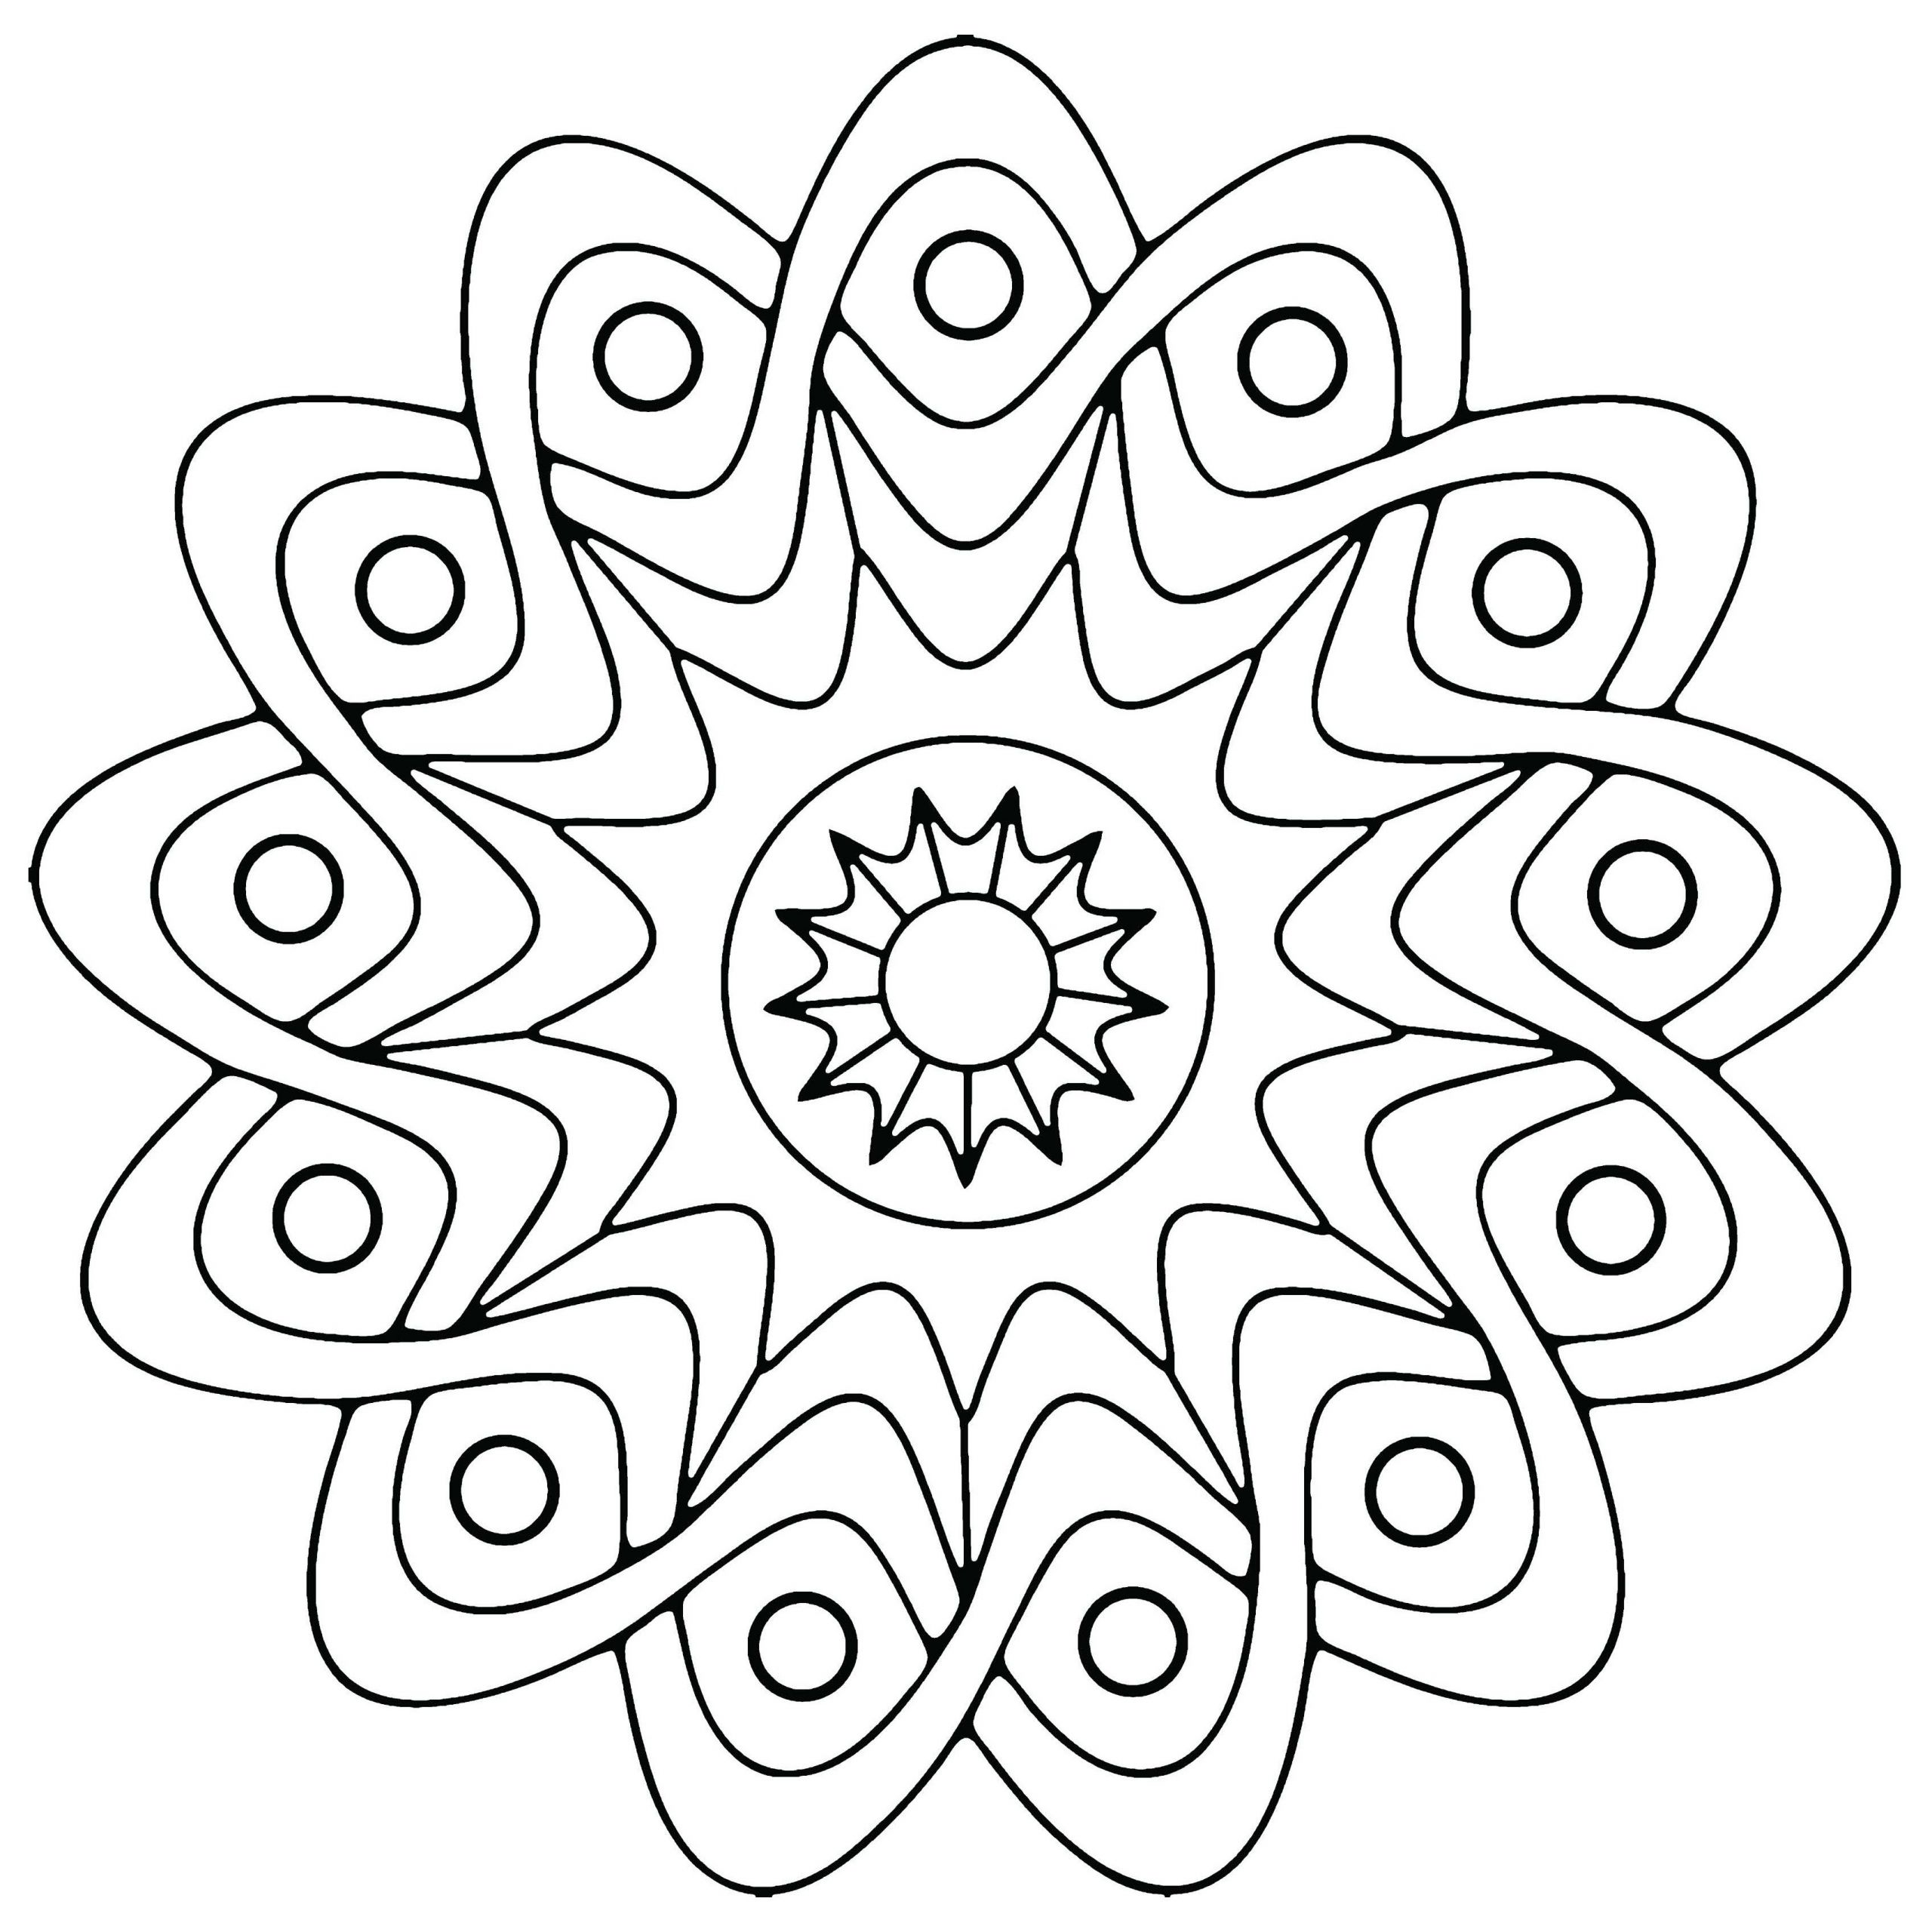 Free Coloring Sheets For Kids
 Free Printable Geometric Coloring Pages For Kids